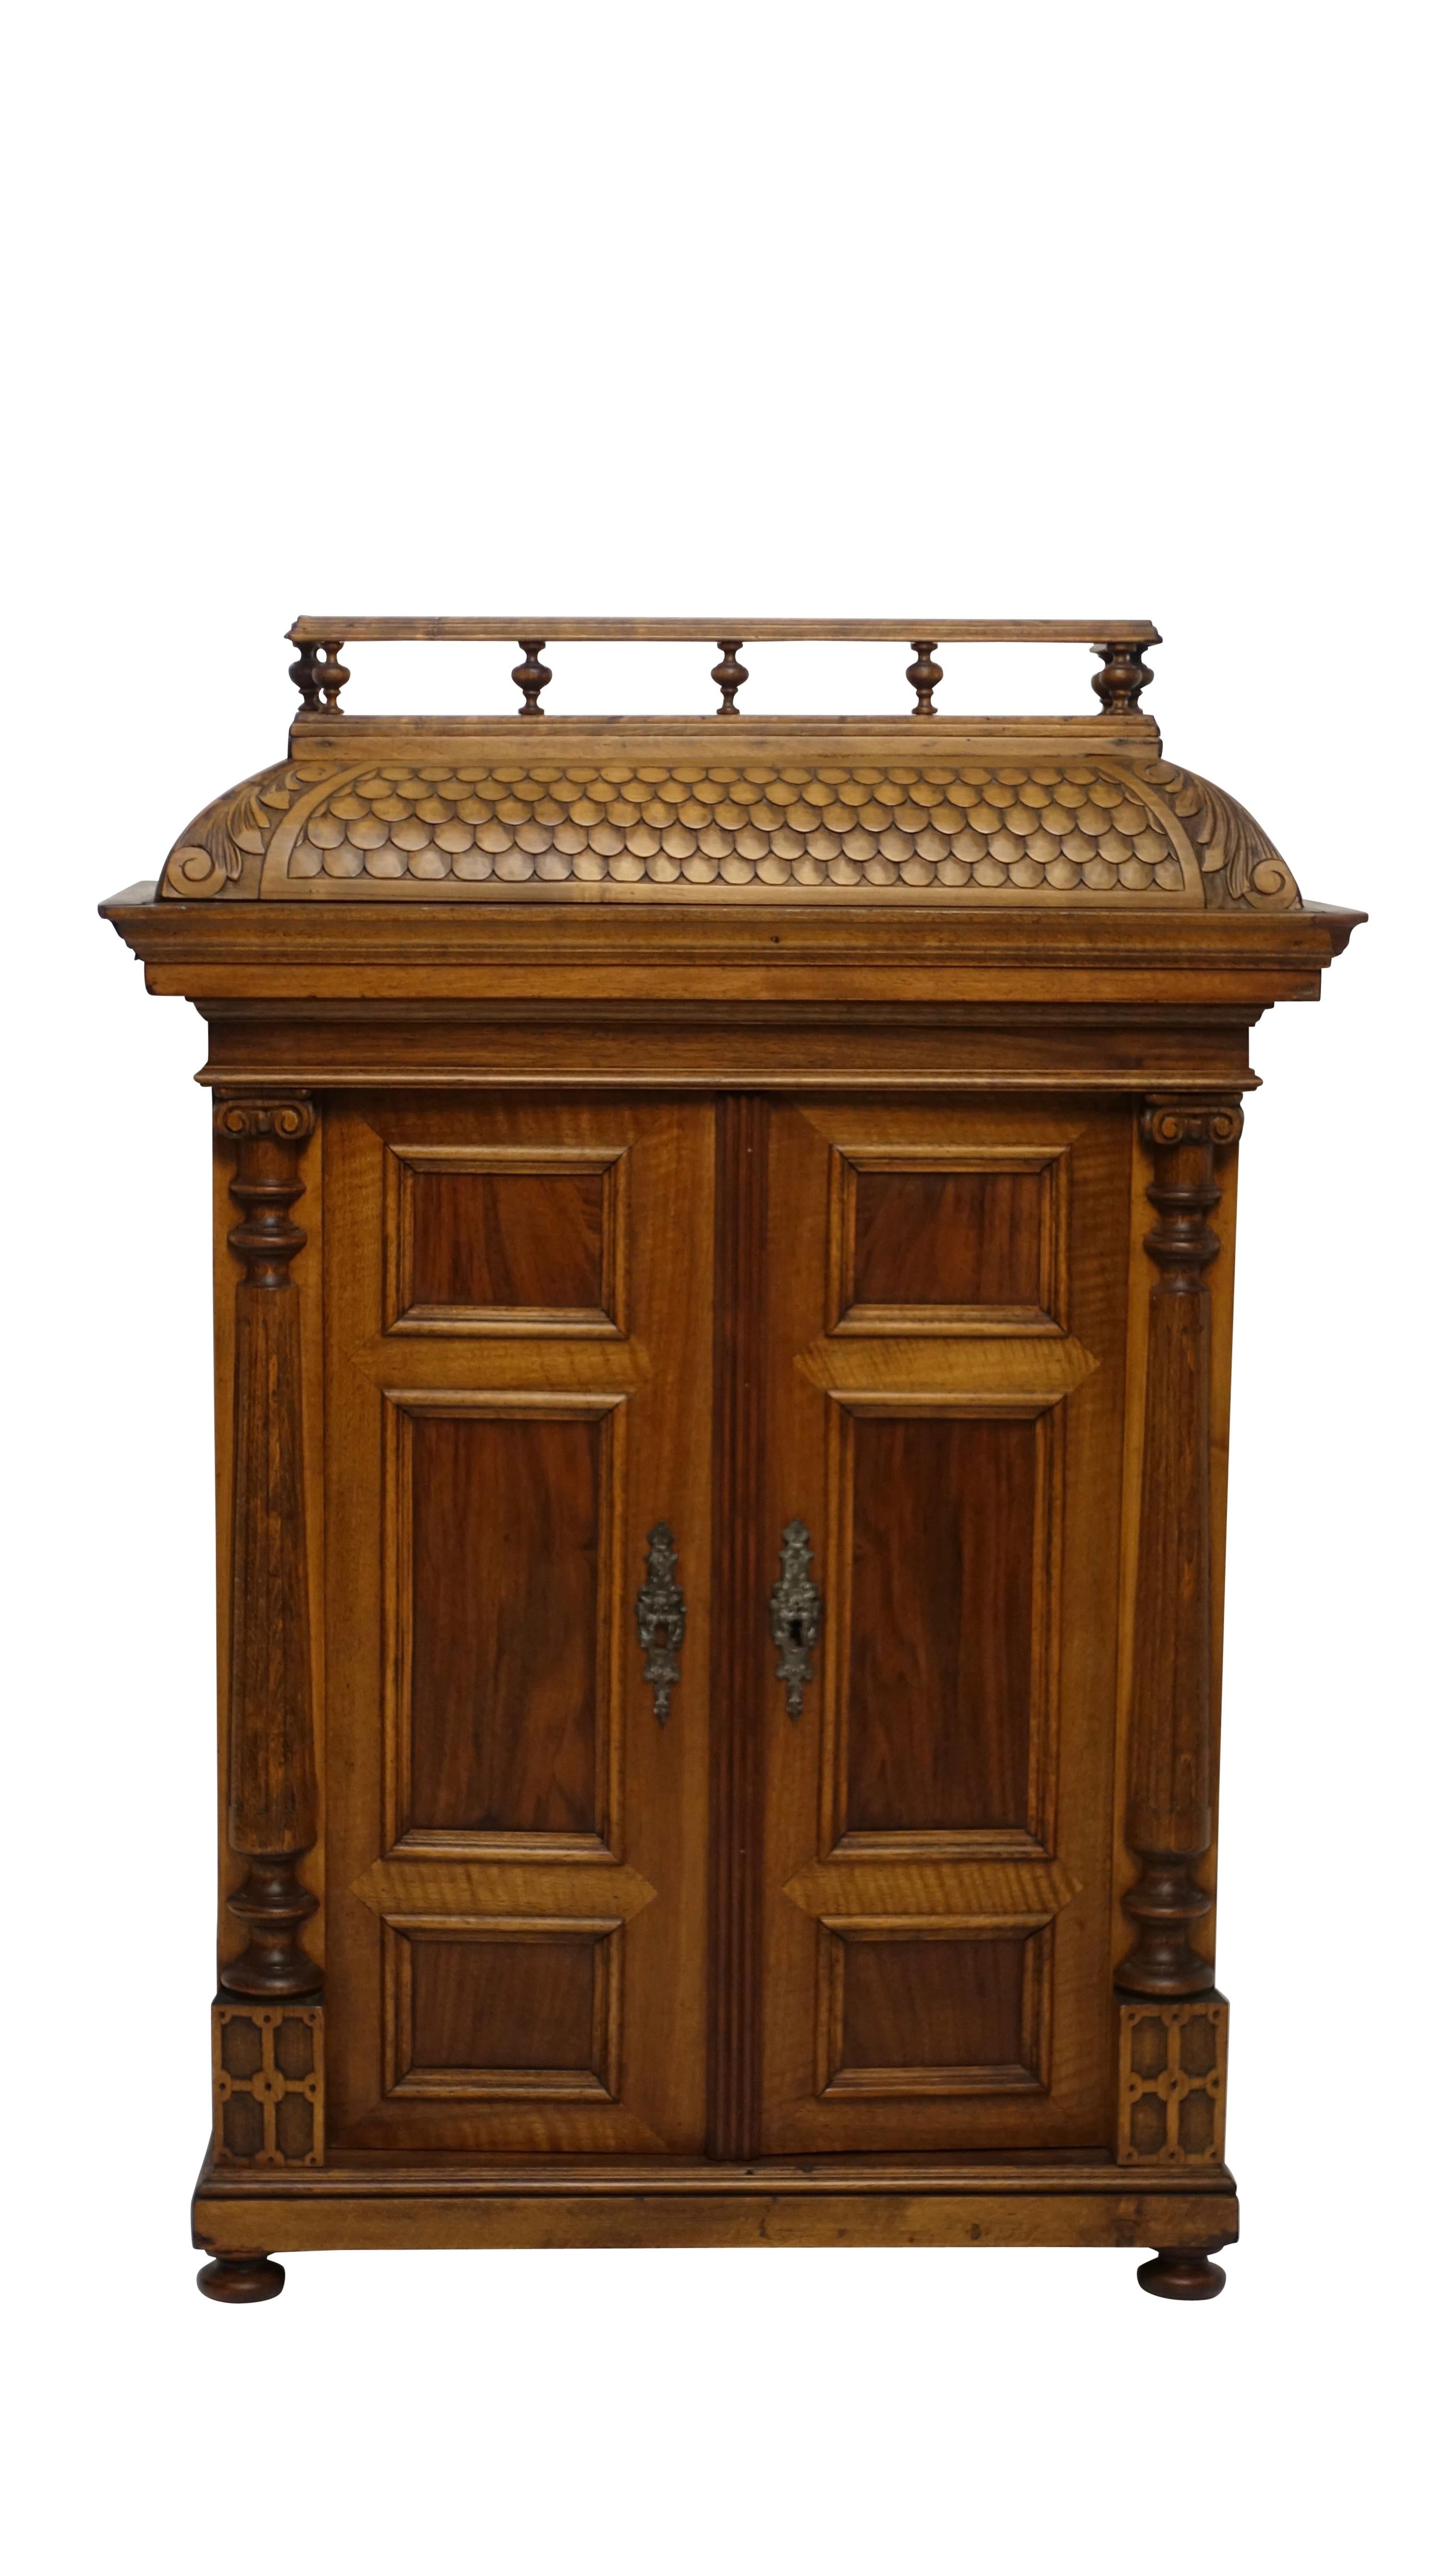 Cabinet Maker's Miniature Scale Model of a French Armoire, Late 19th Century 3